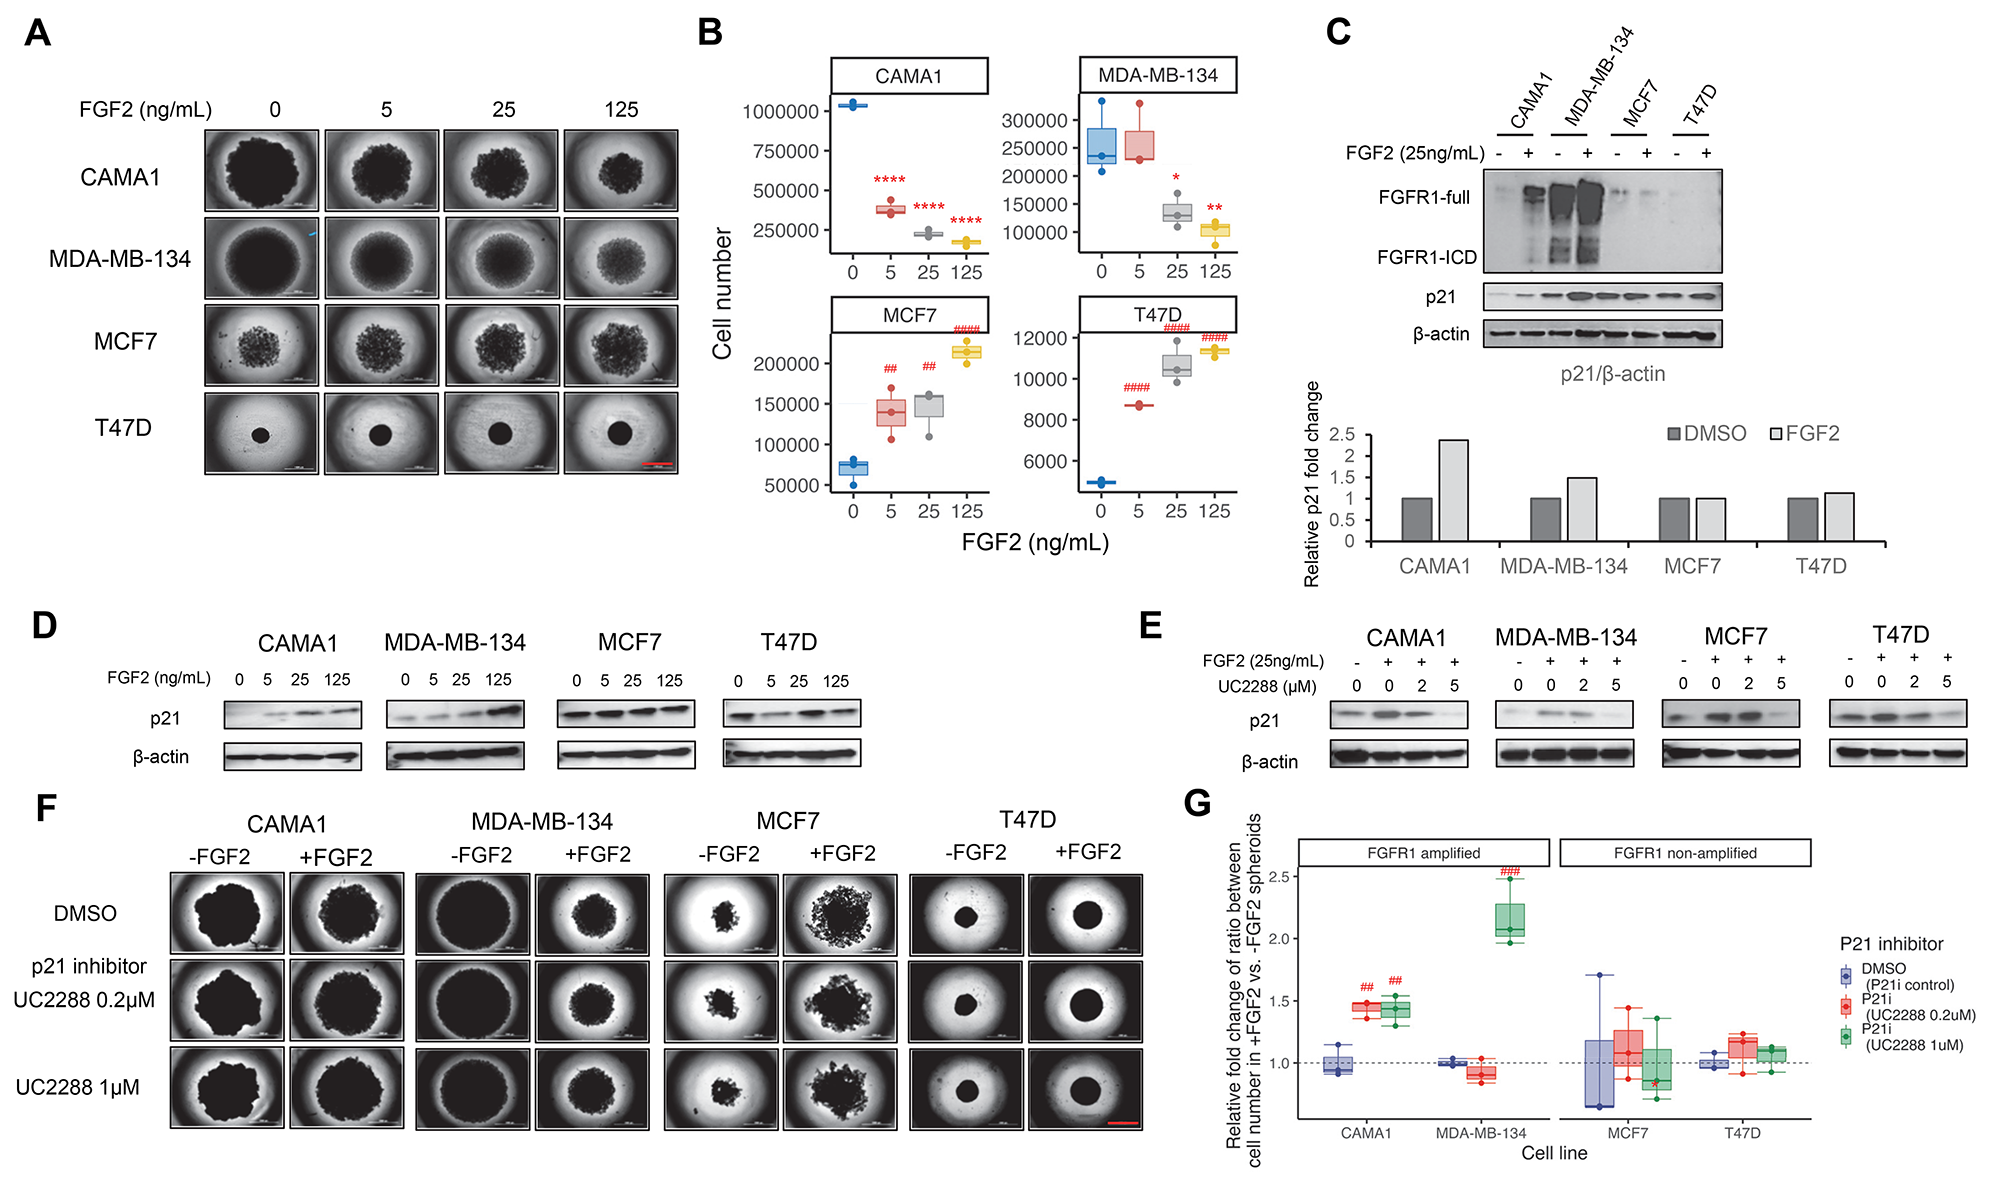 Paradoxical cancer cell proliferation after FGFR inhibition through decreased p21 signaling in FGFR1-amplified breast cancer cells